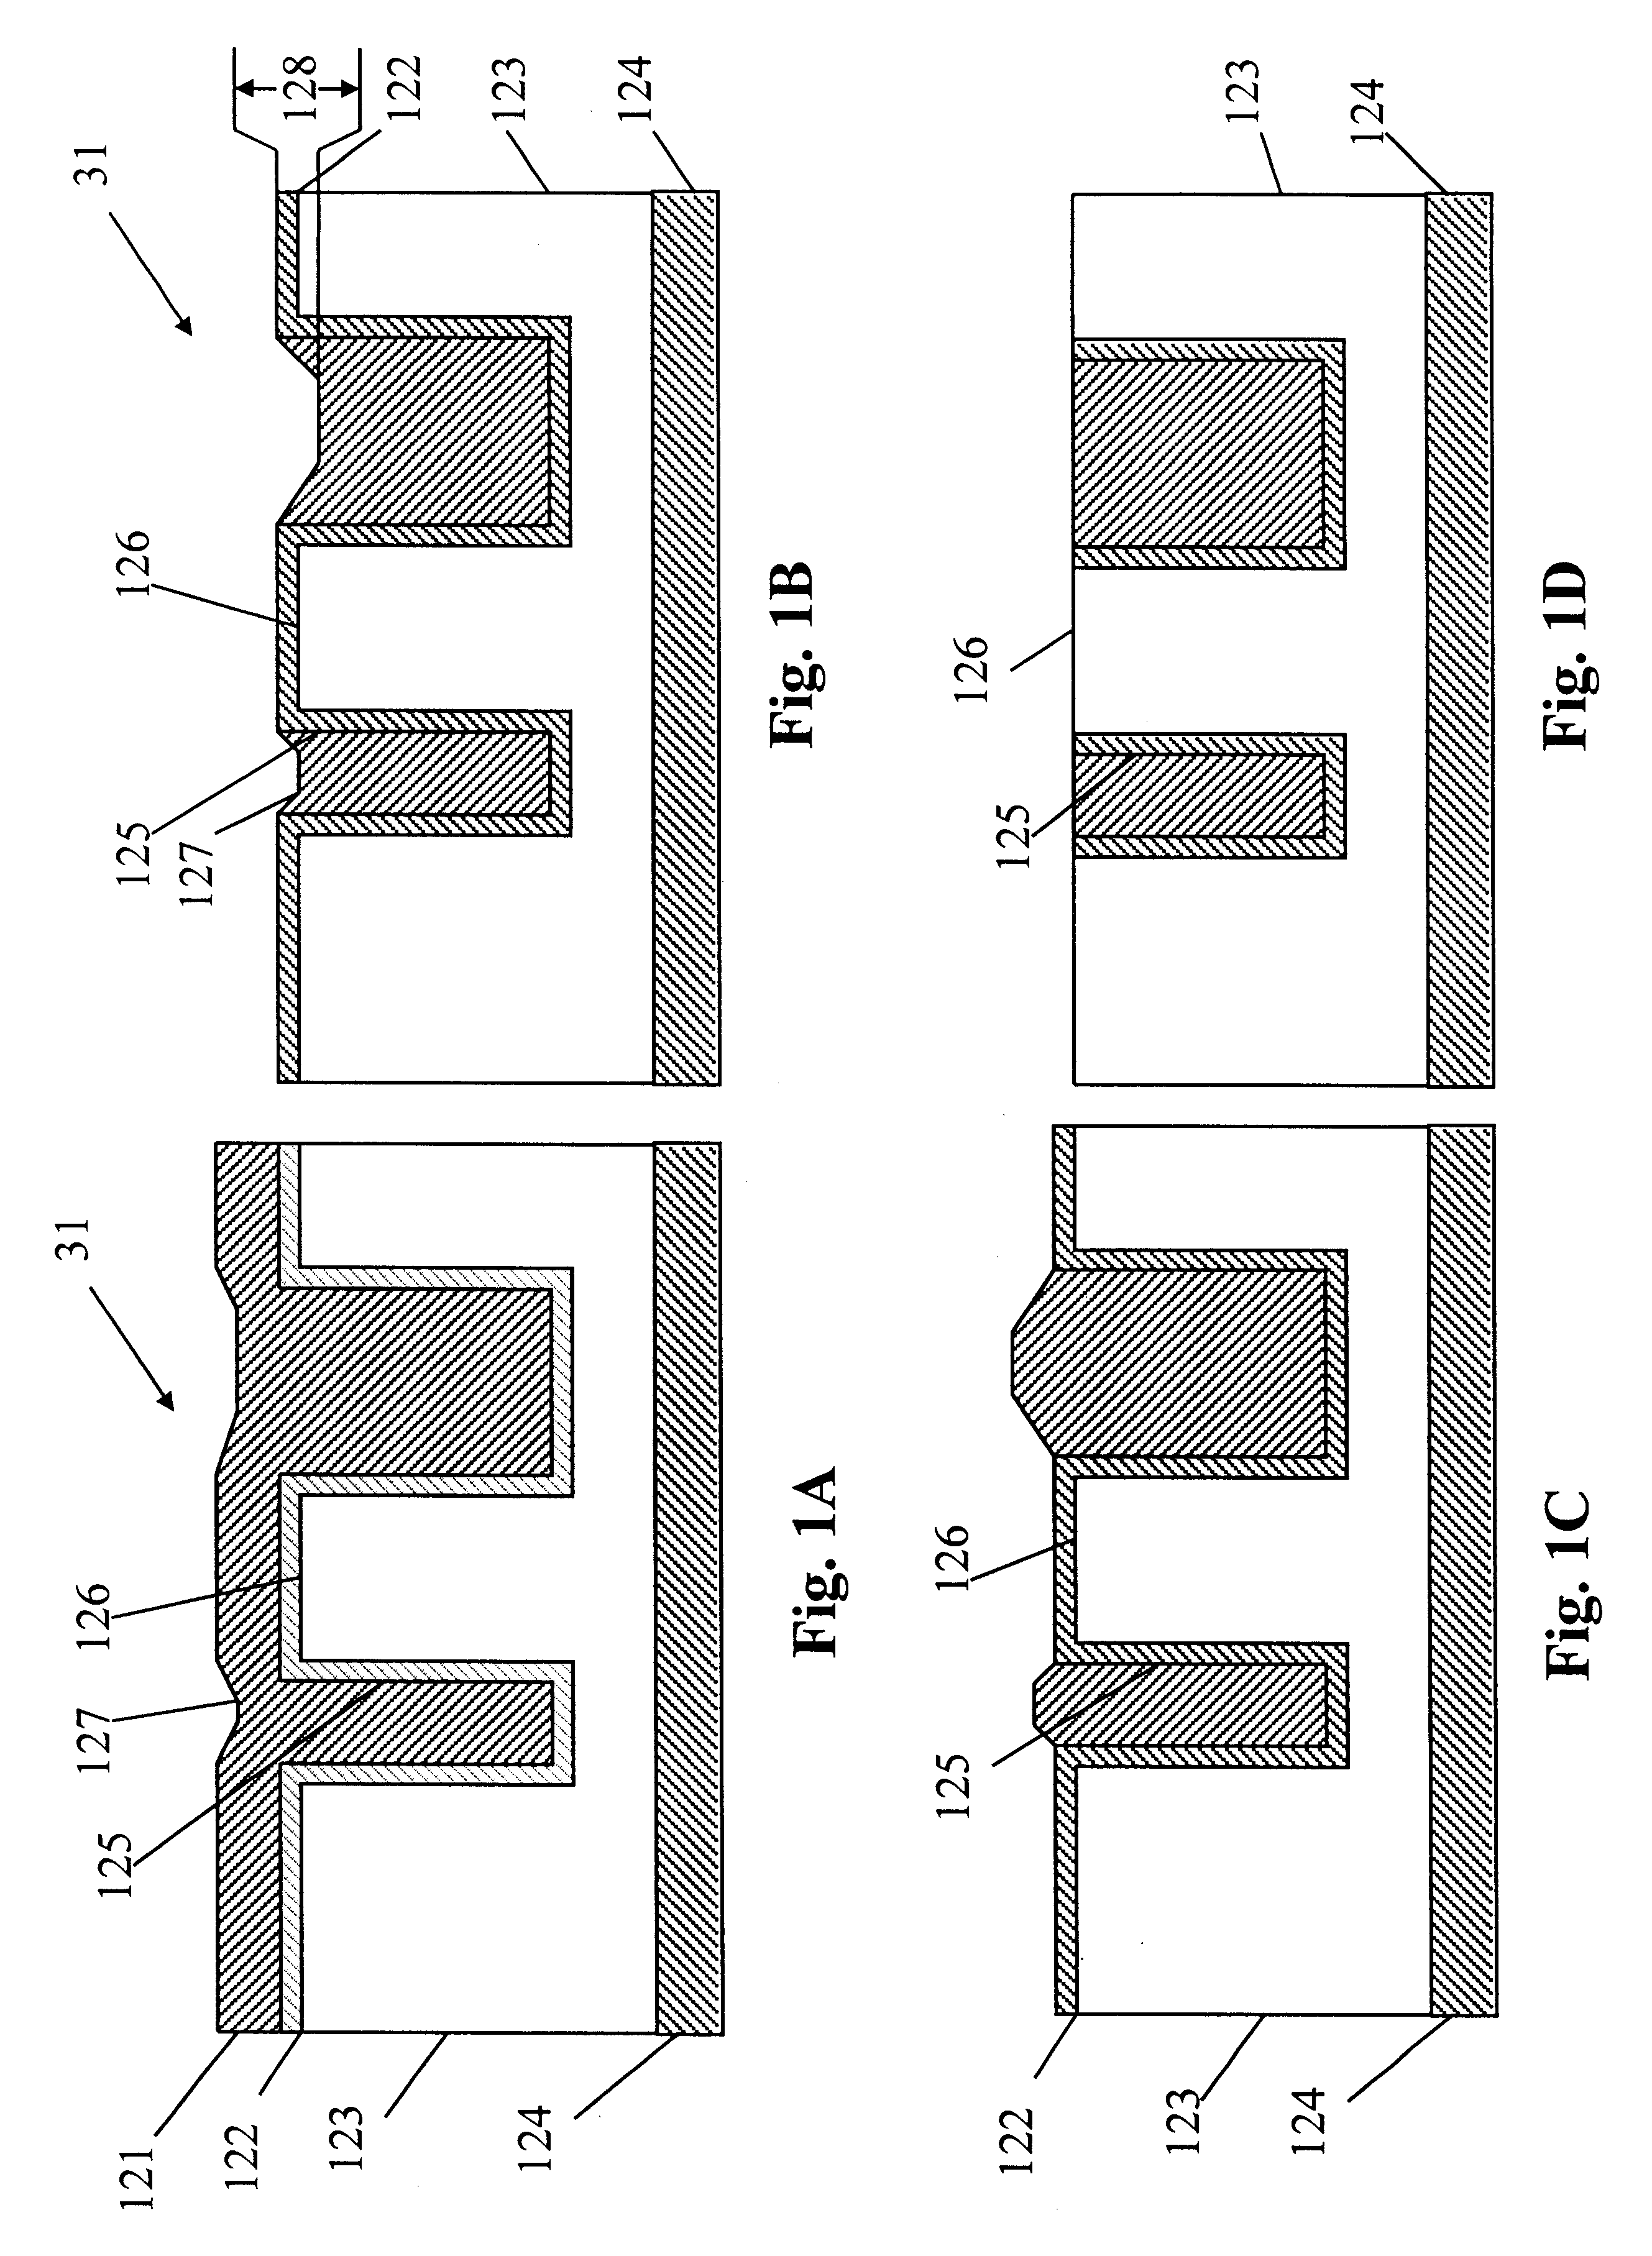 Methods and apparatus for end-point detection